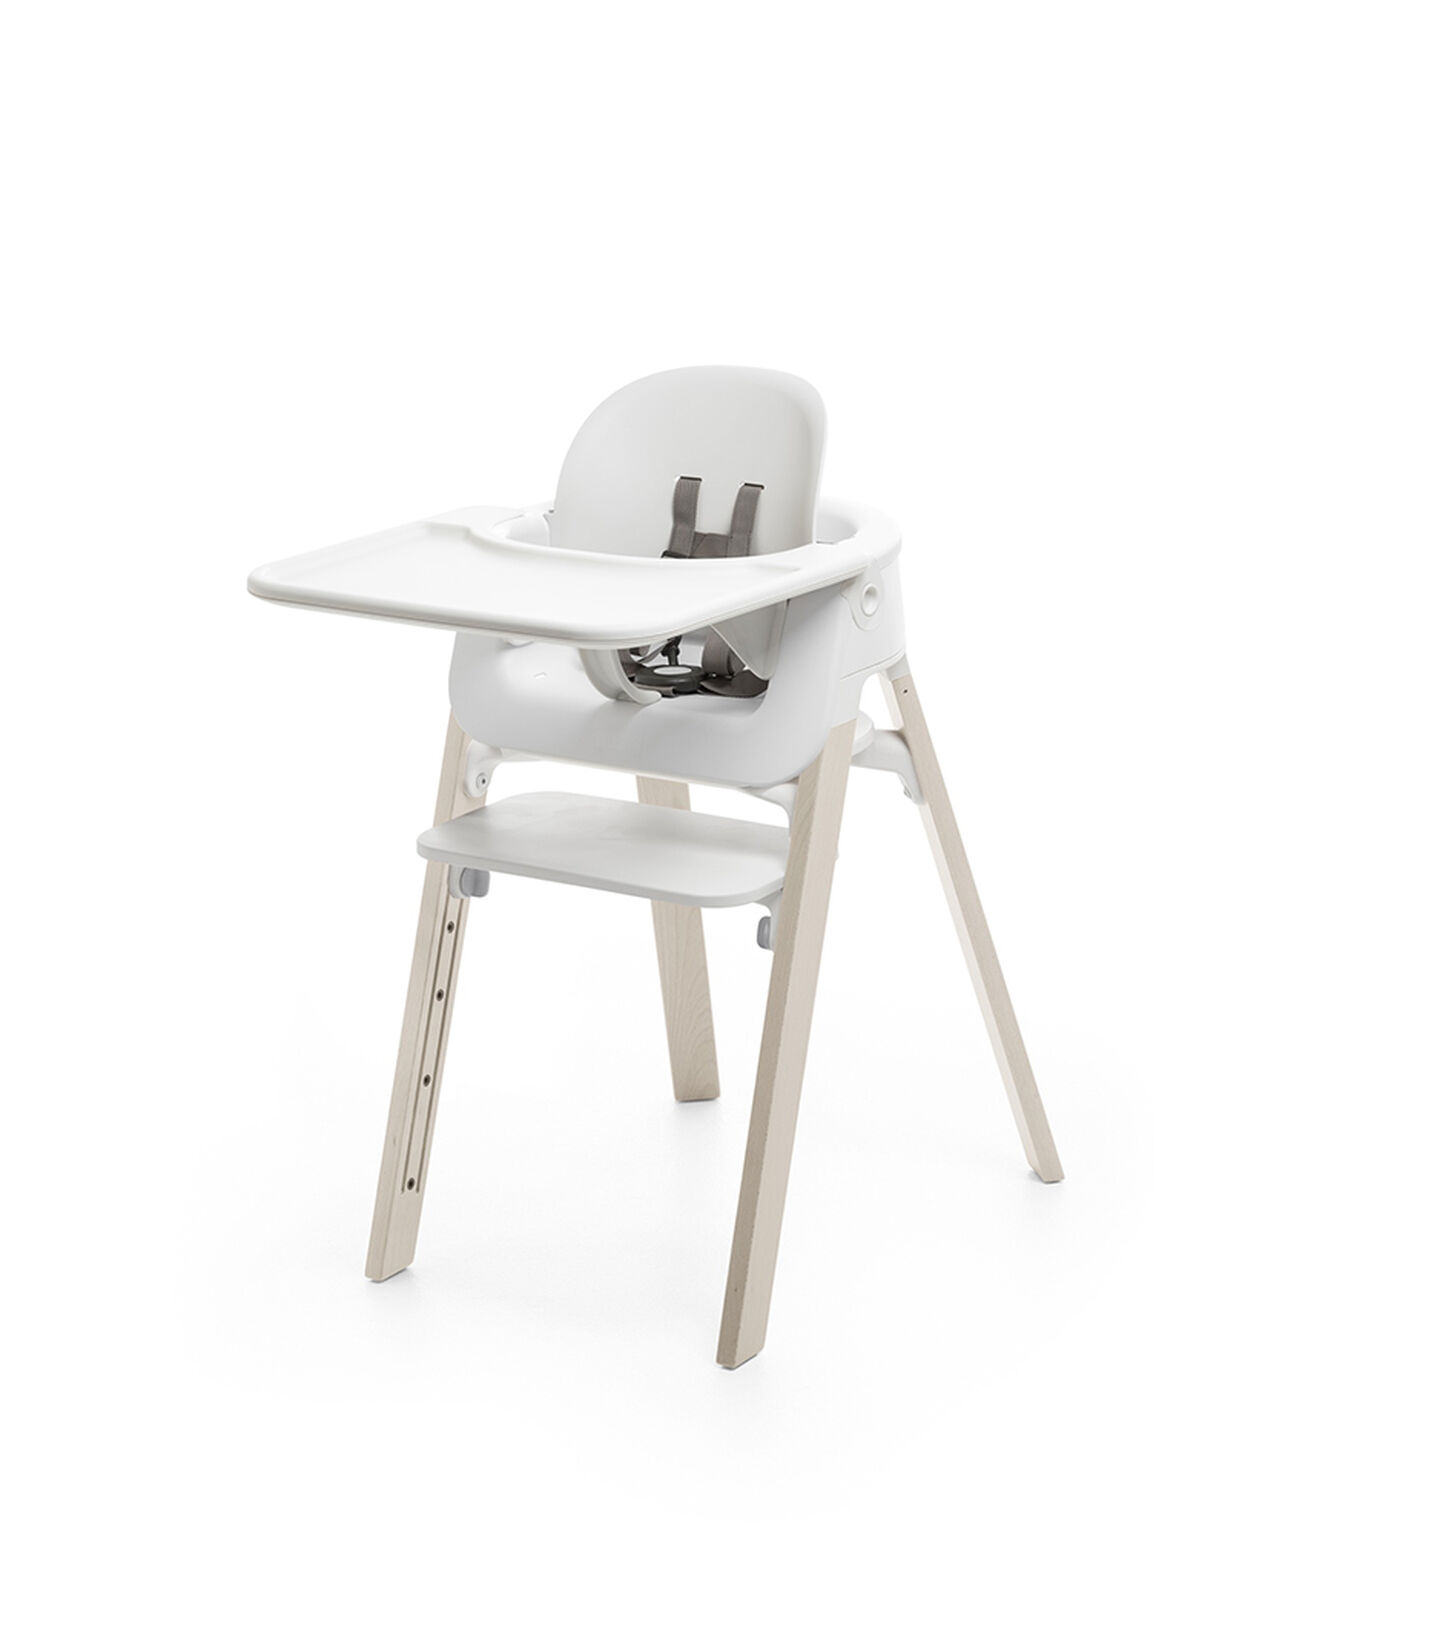 Stokke® Steps™ Baby Set in de kleur White, Wit, mainview view 4